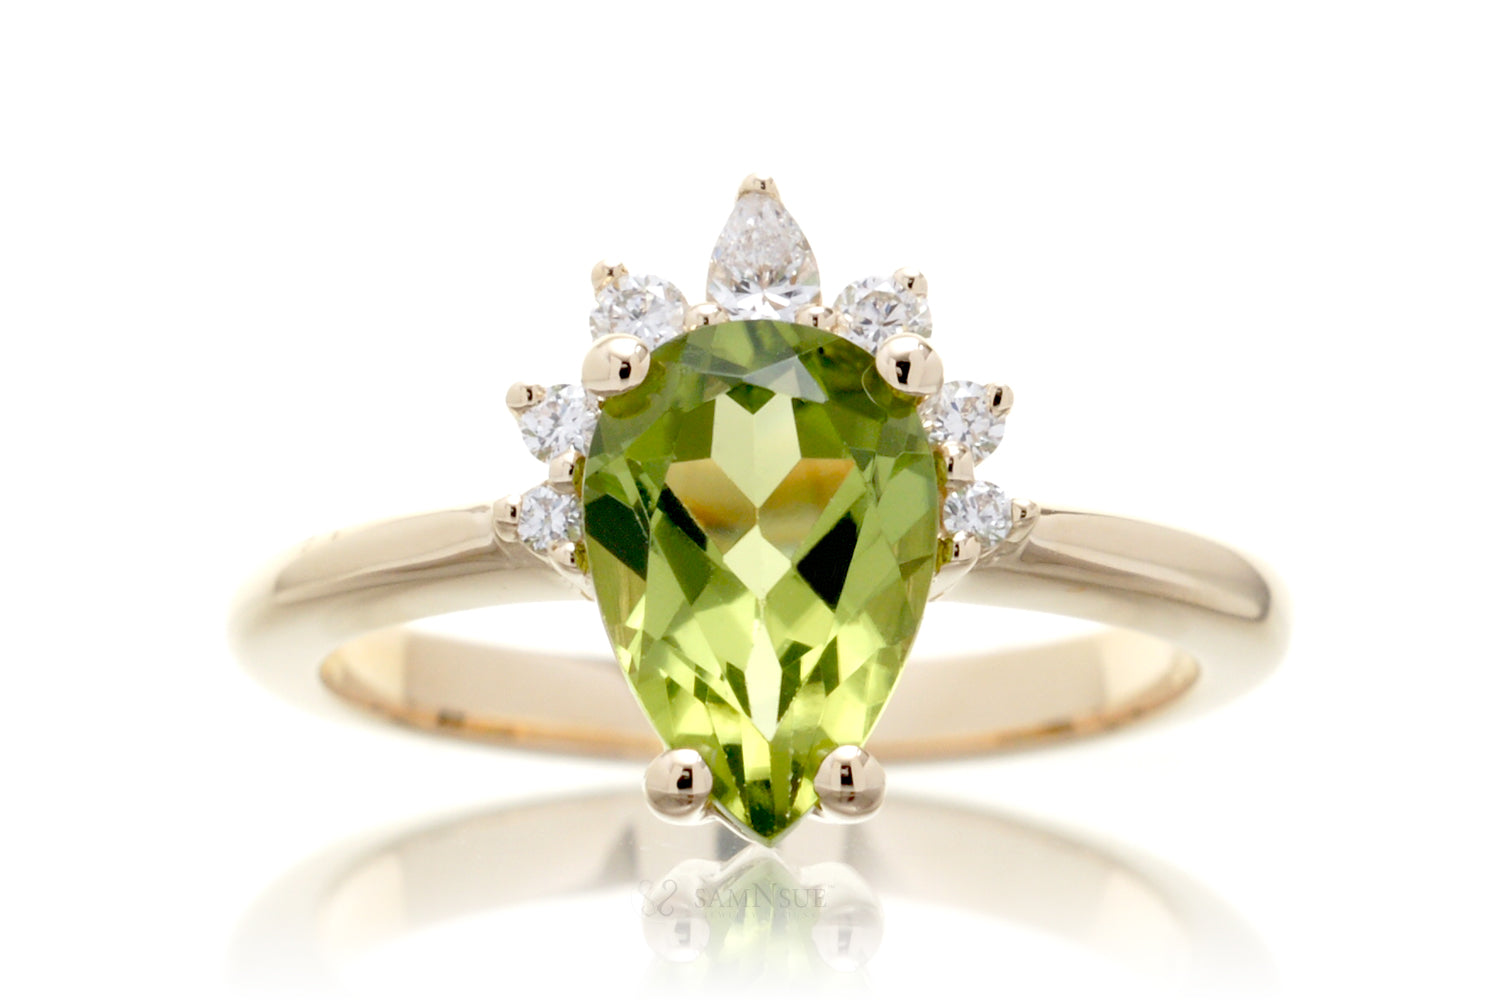 The Pacey Pear Peridot